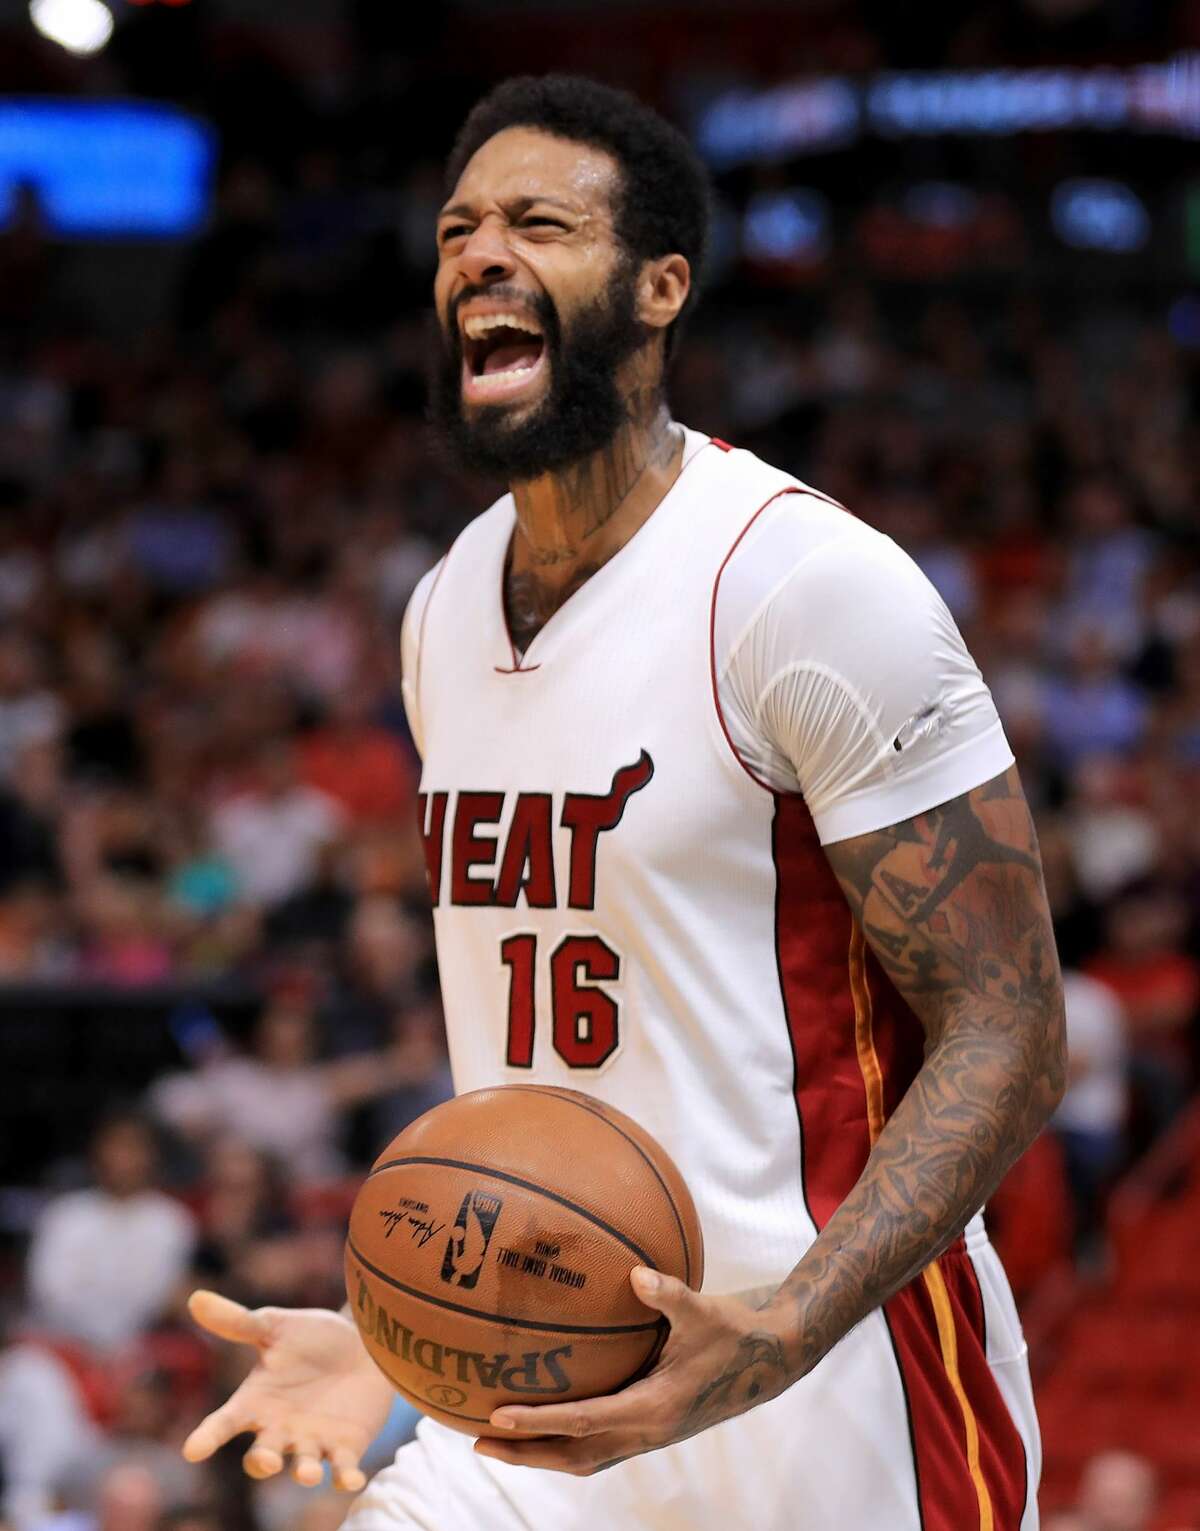 James Johnson, Miami Heat Johnson dramatically improved his conditioning, had a breakthrough season as one of the keys to the Heat's second half run and will likely be rewarded.